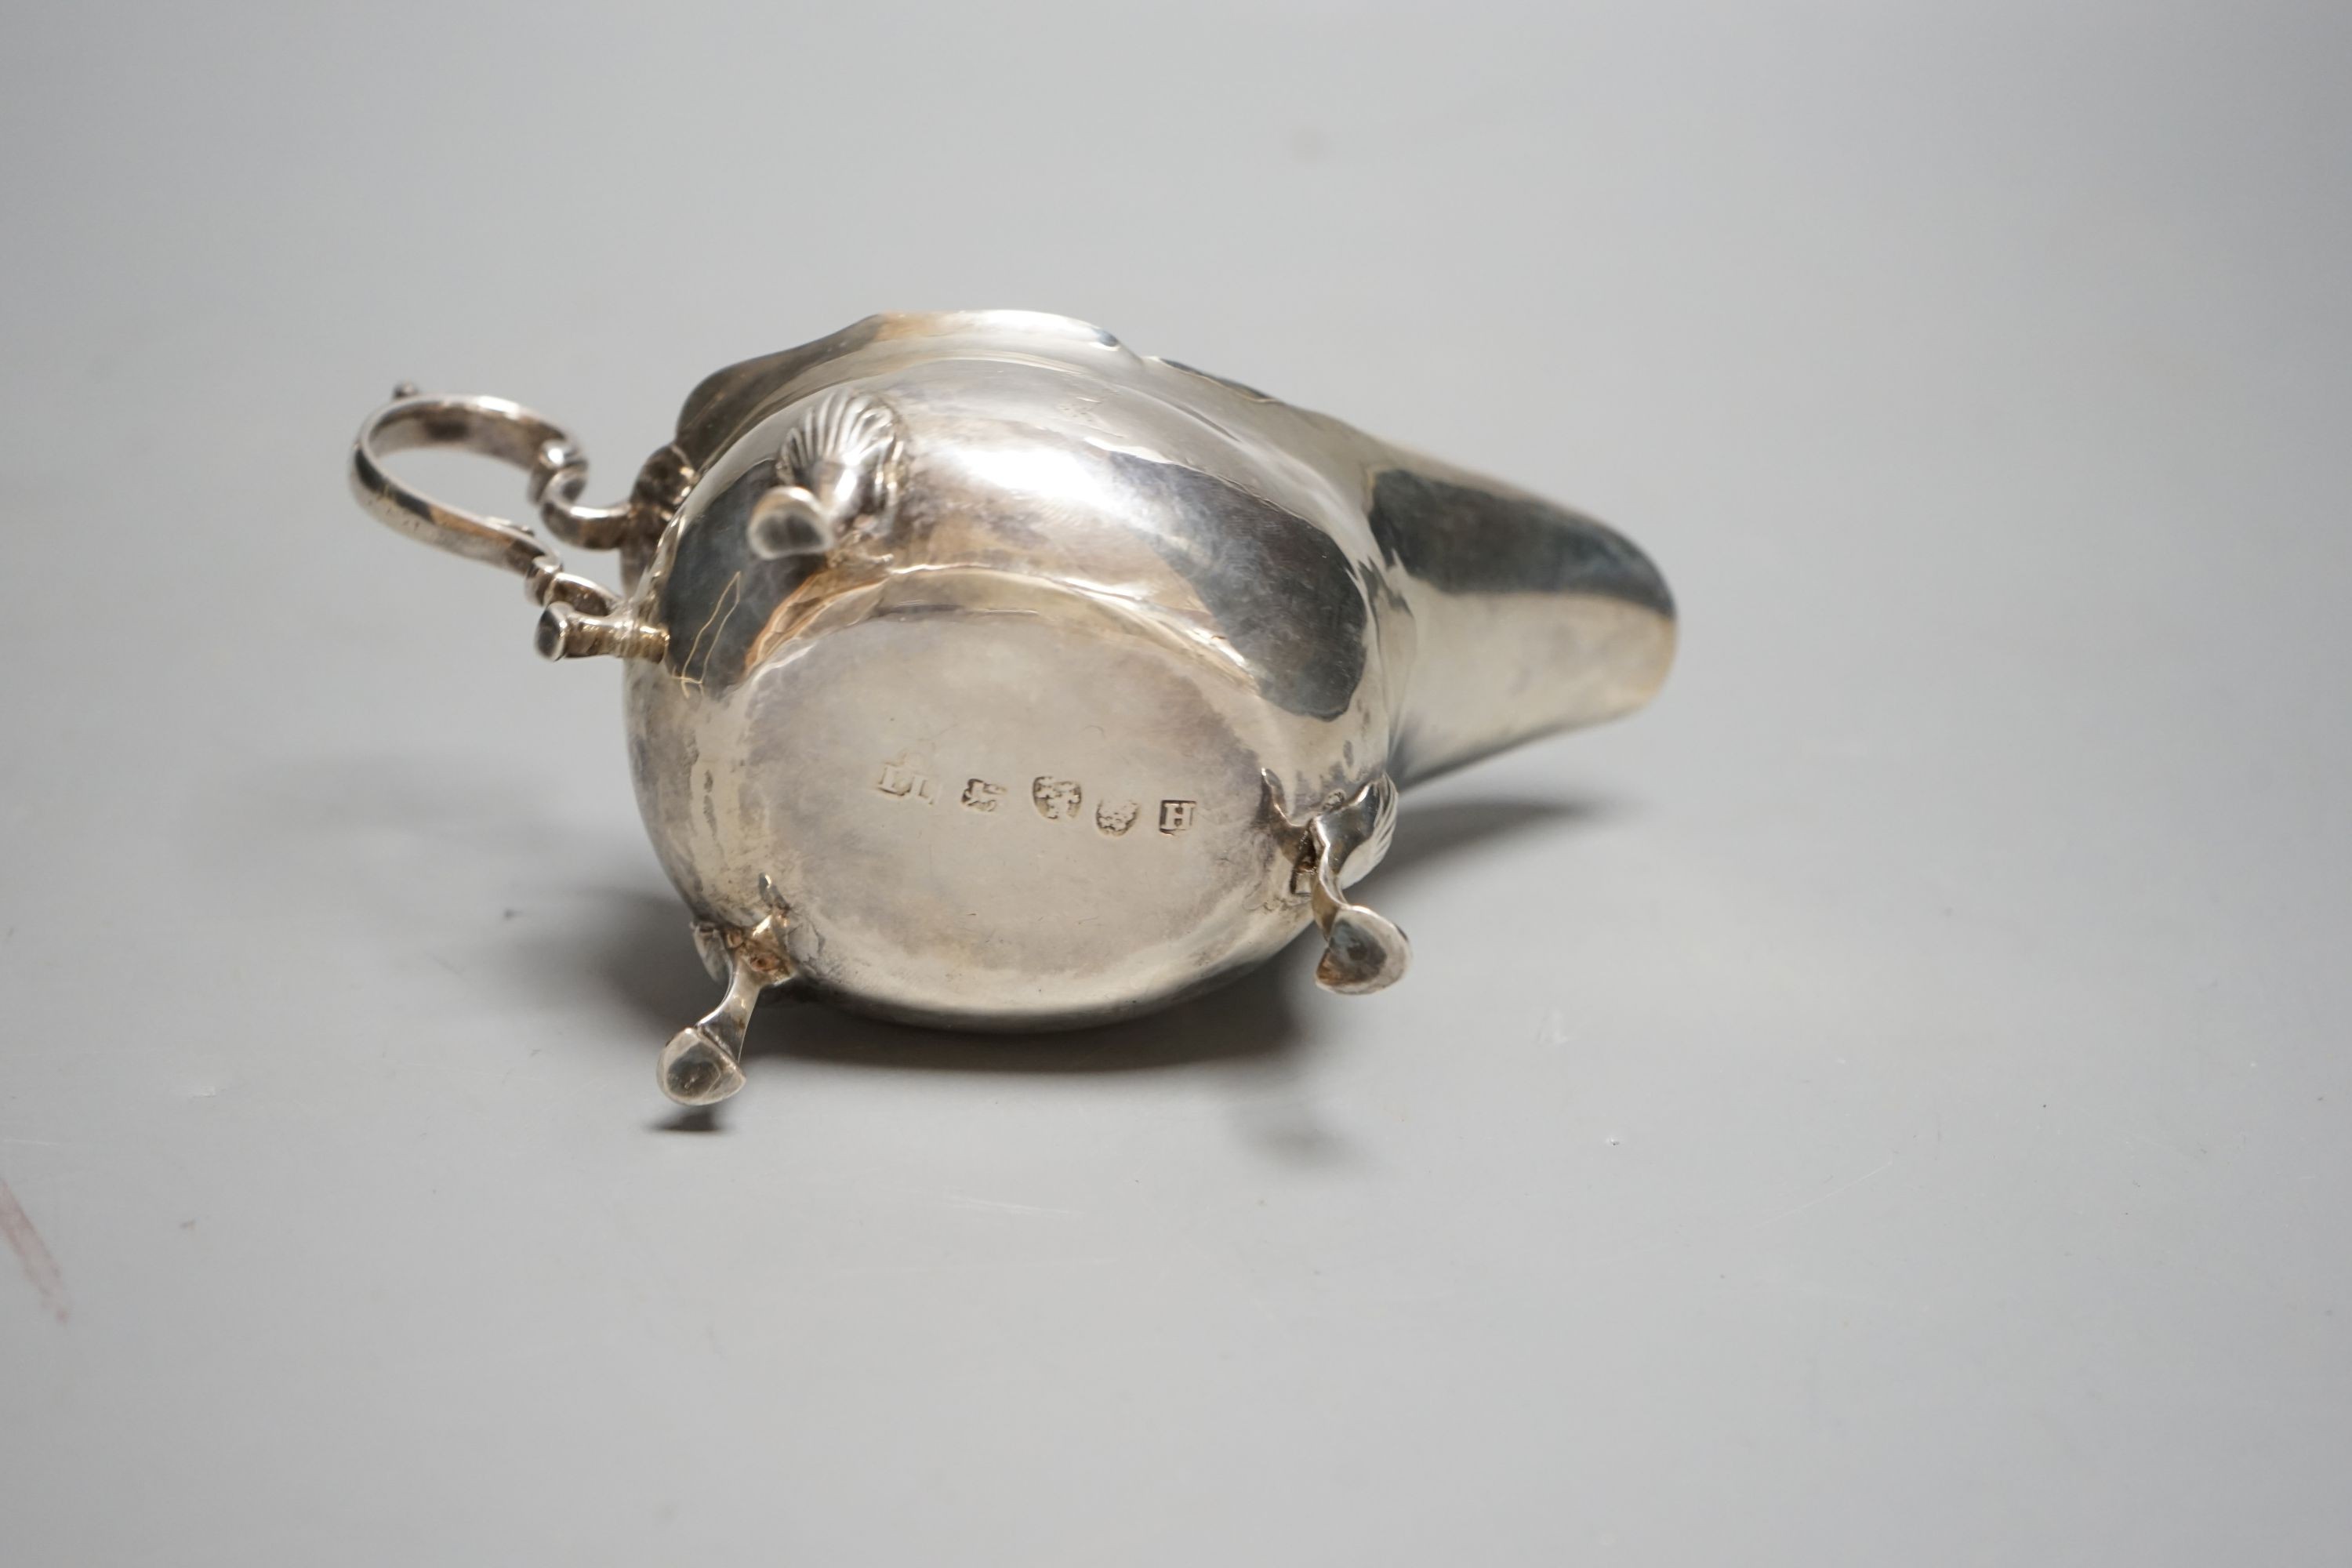 A George III provincial silver sauceboat by John Langlands, Newcastle, 1774, length 15.8cm